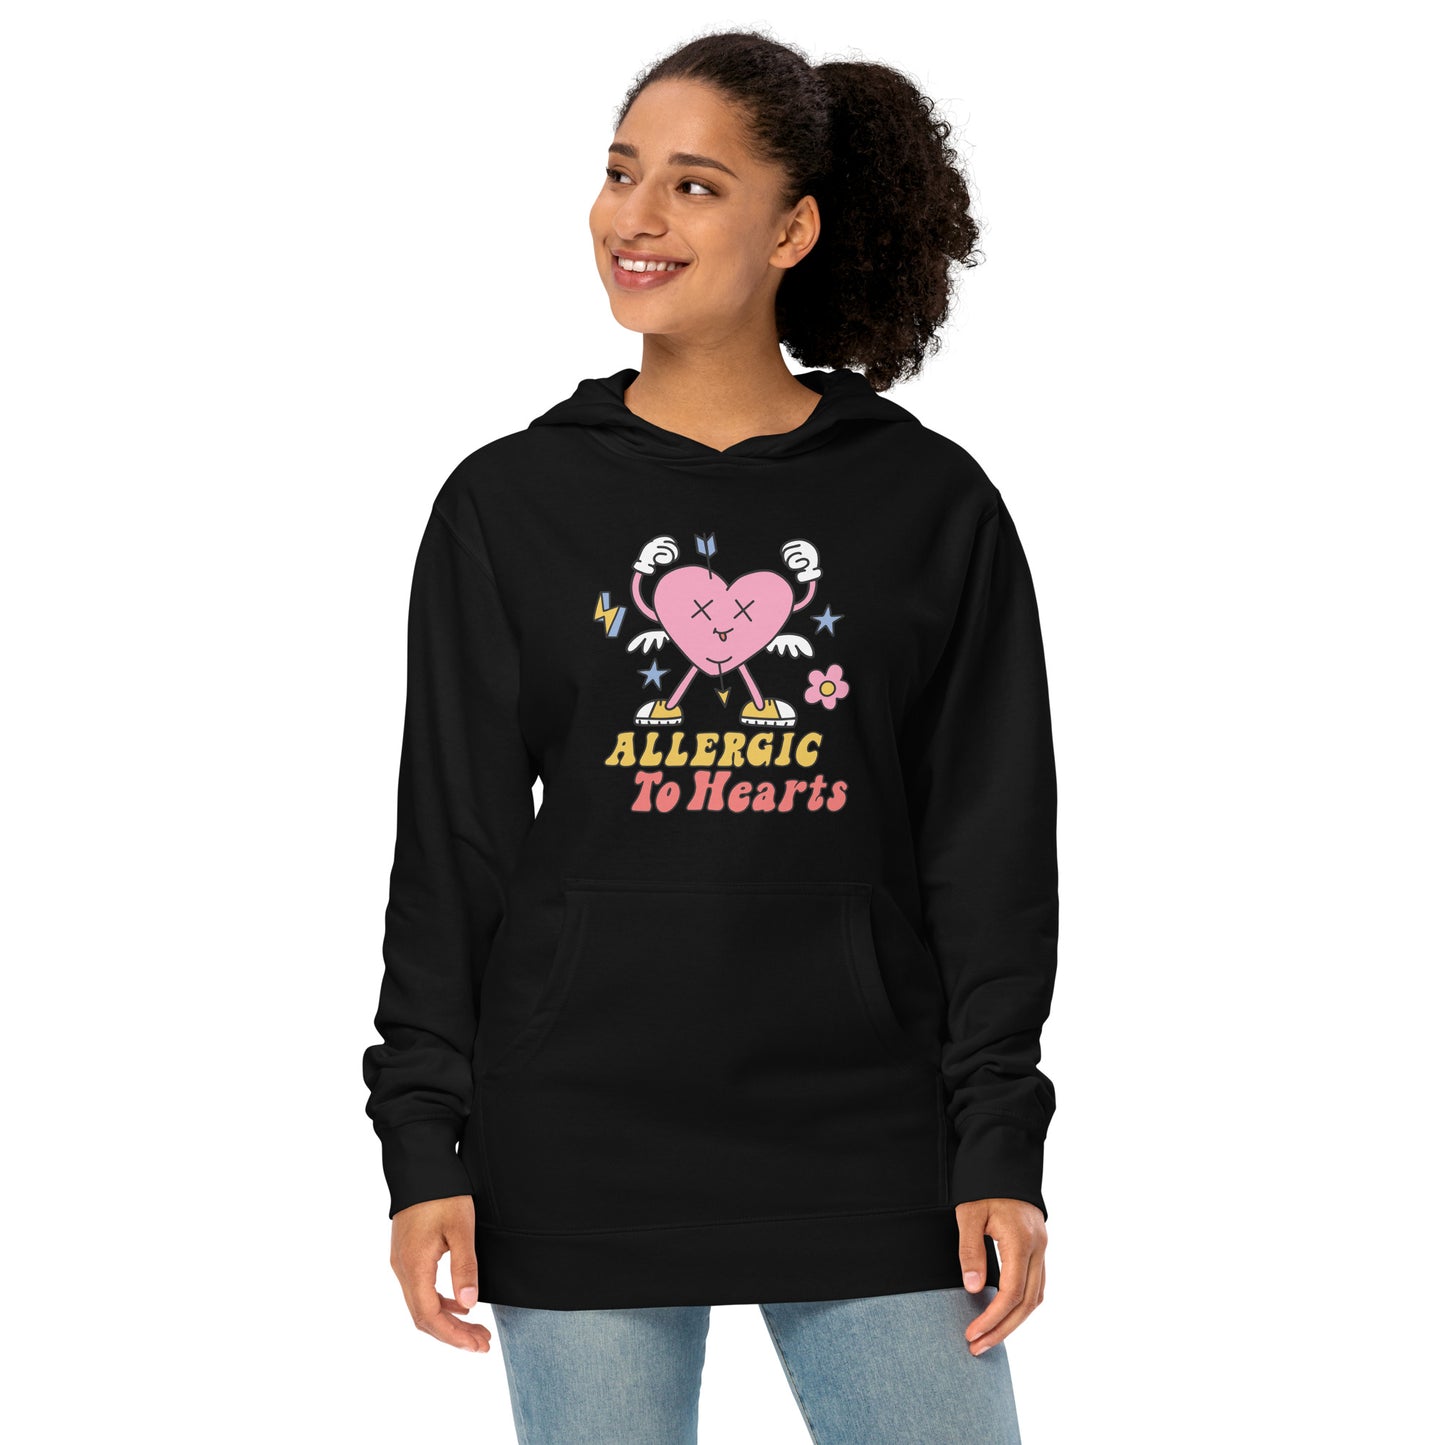 Adult 'Allergic to Hearts' Midweight Hoodie